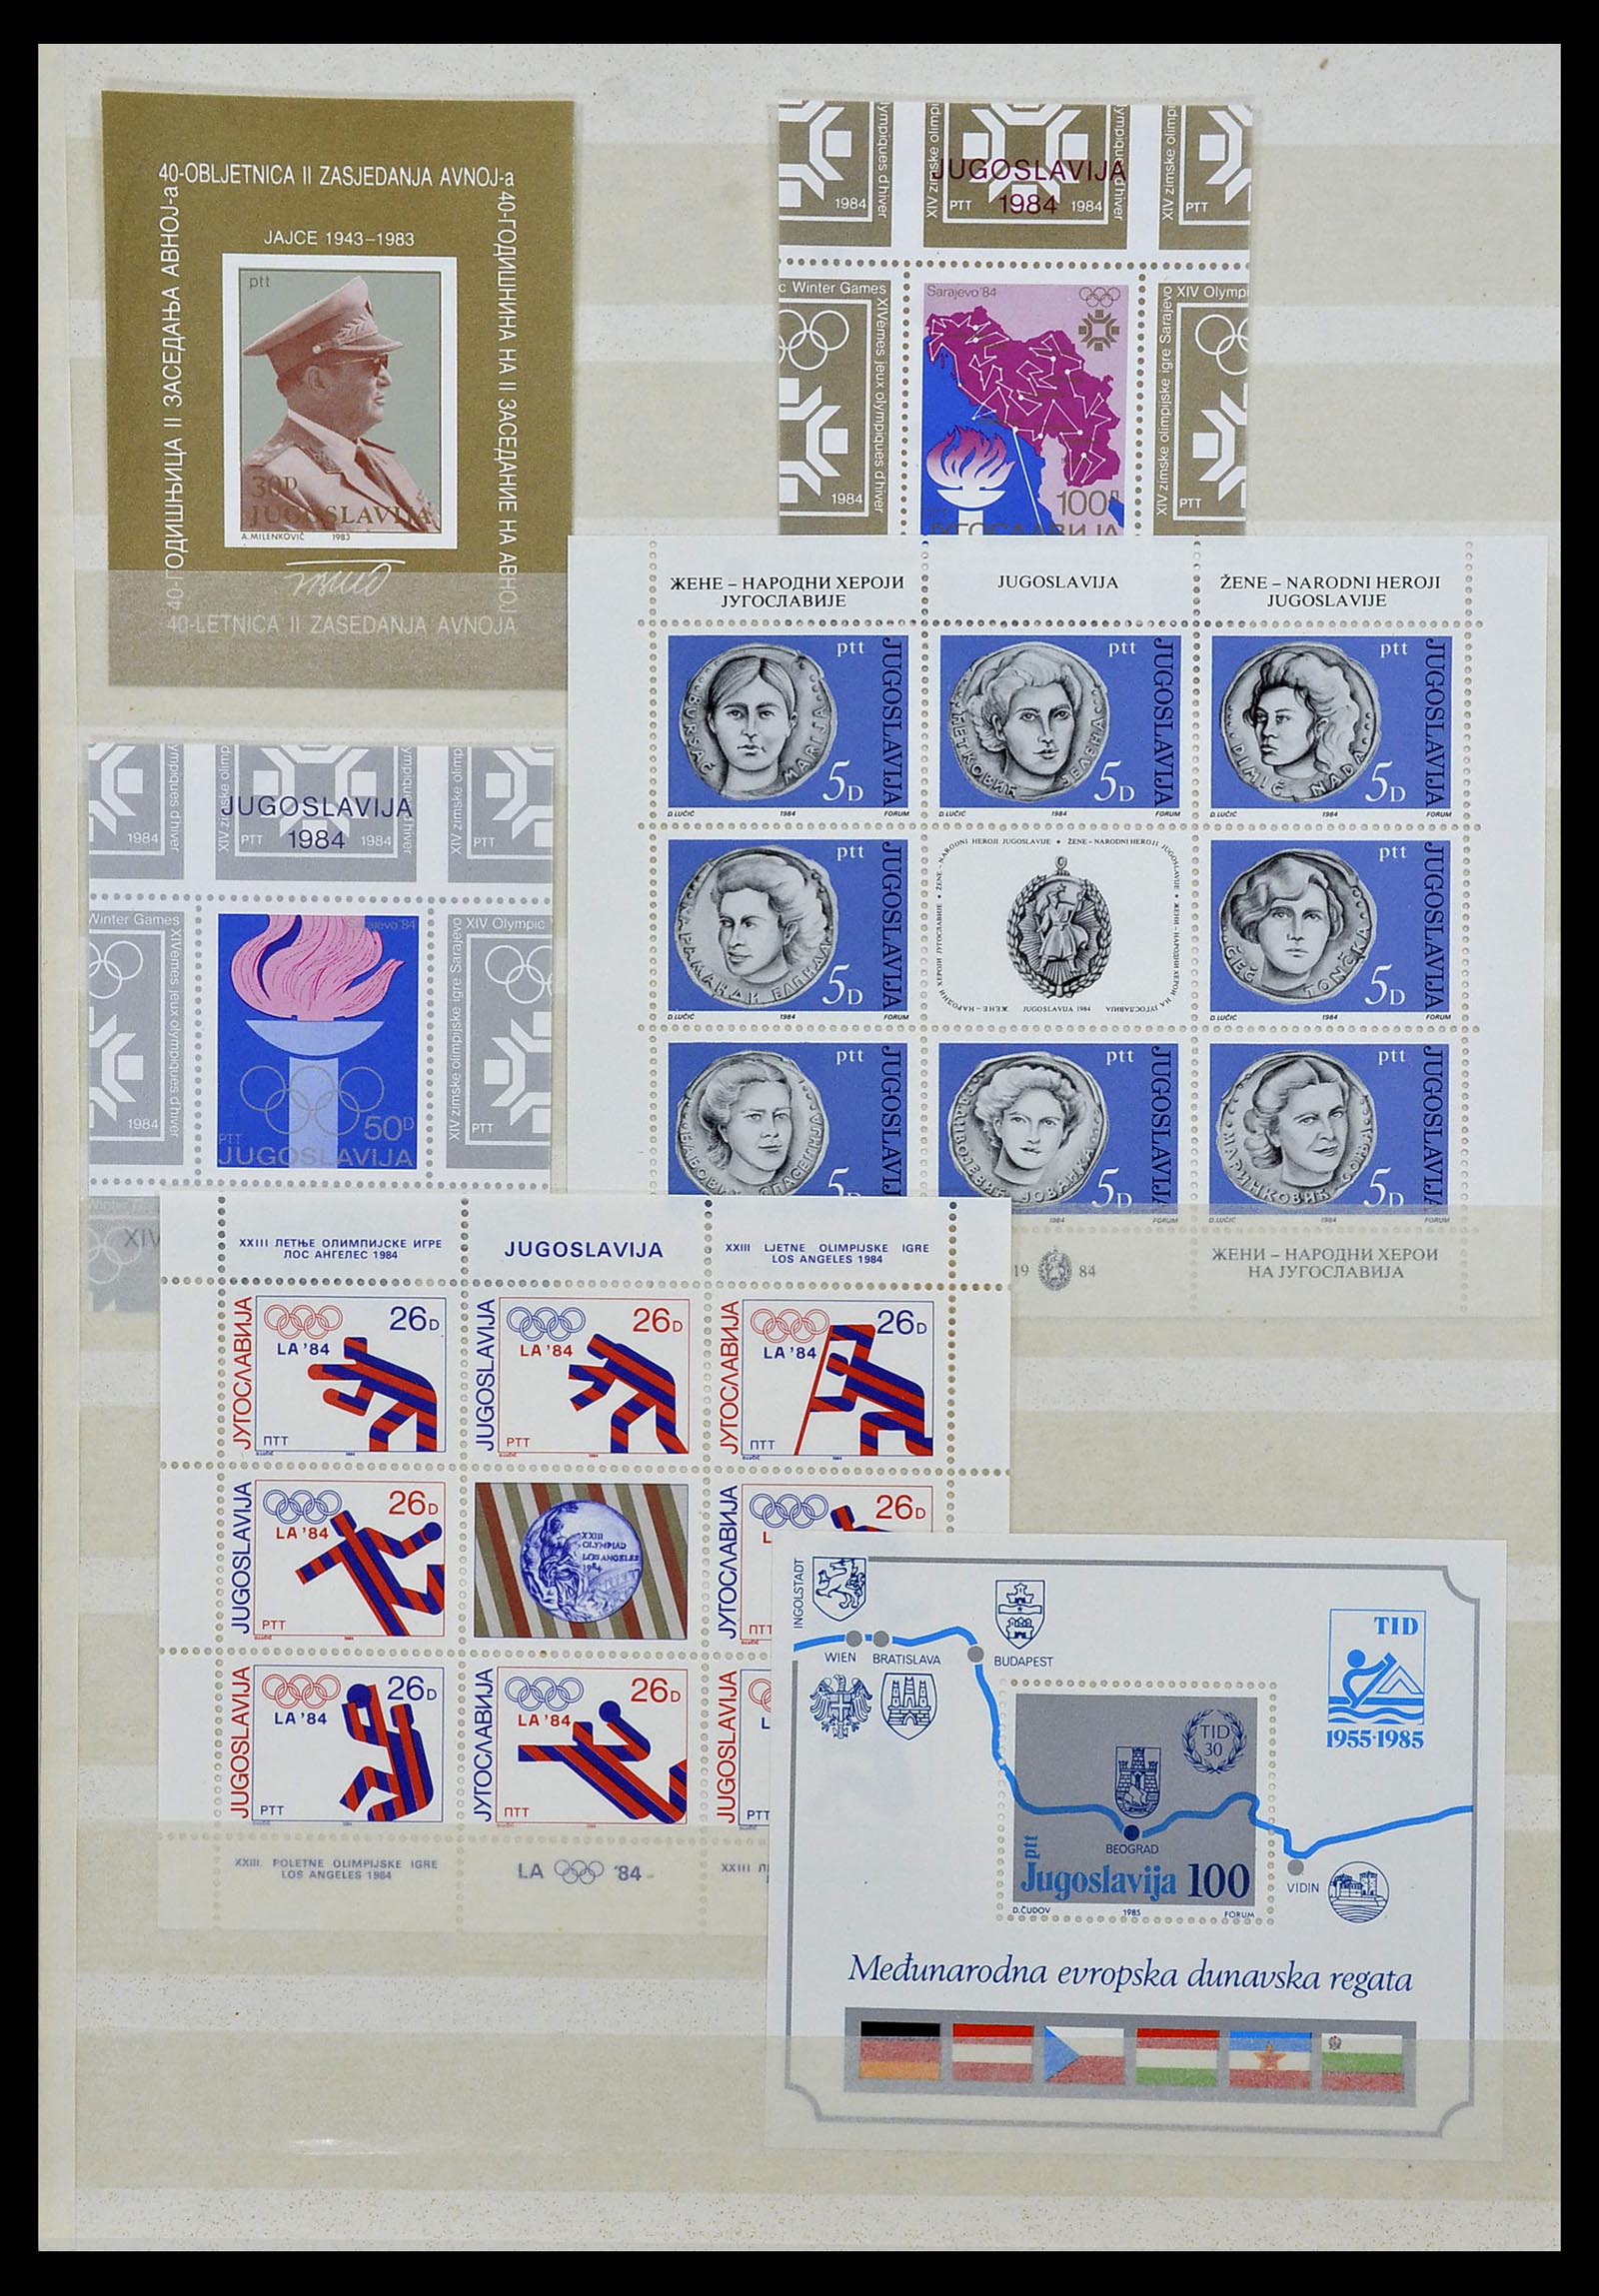 34045 036 - Stamp collection 34045 Western Europe souvenir sheets 1973-1986.